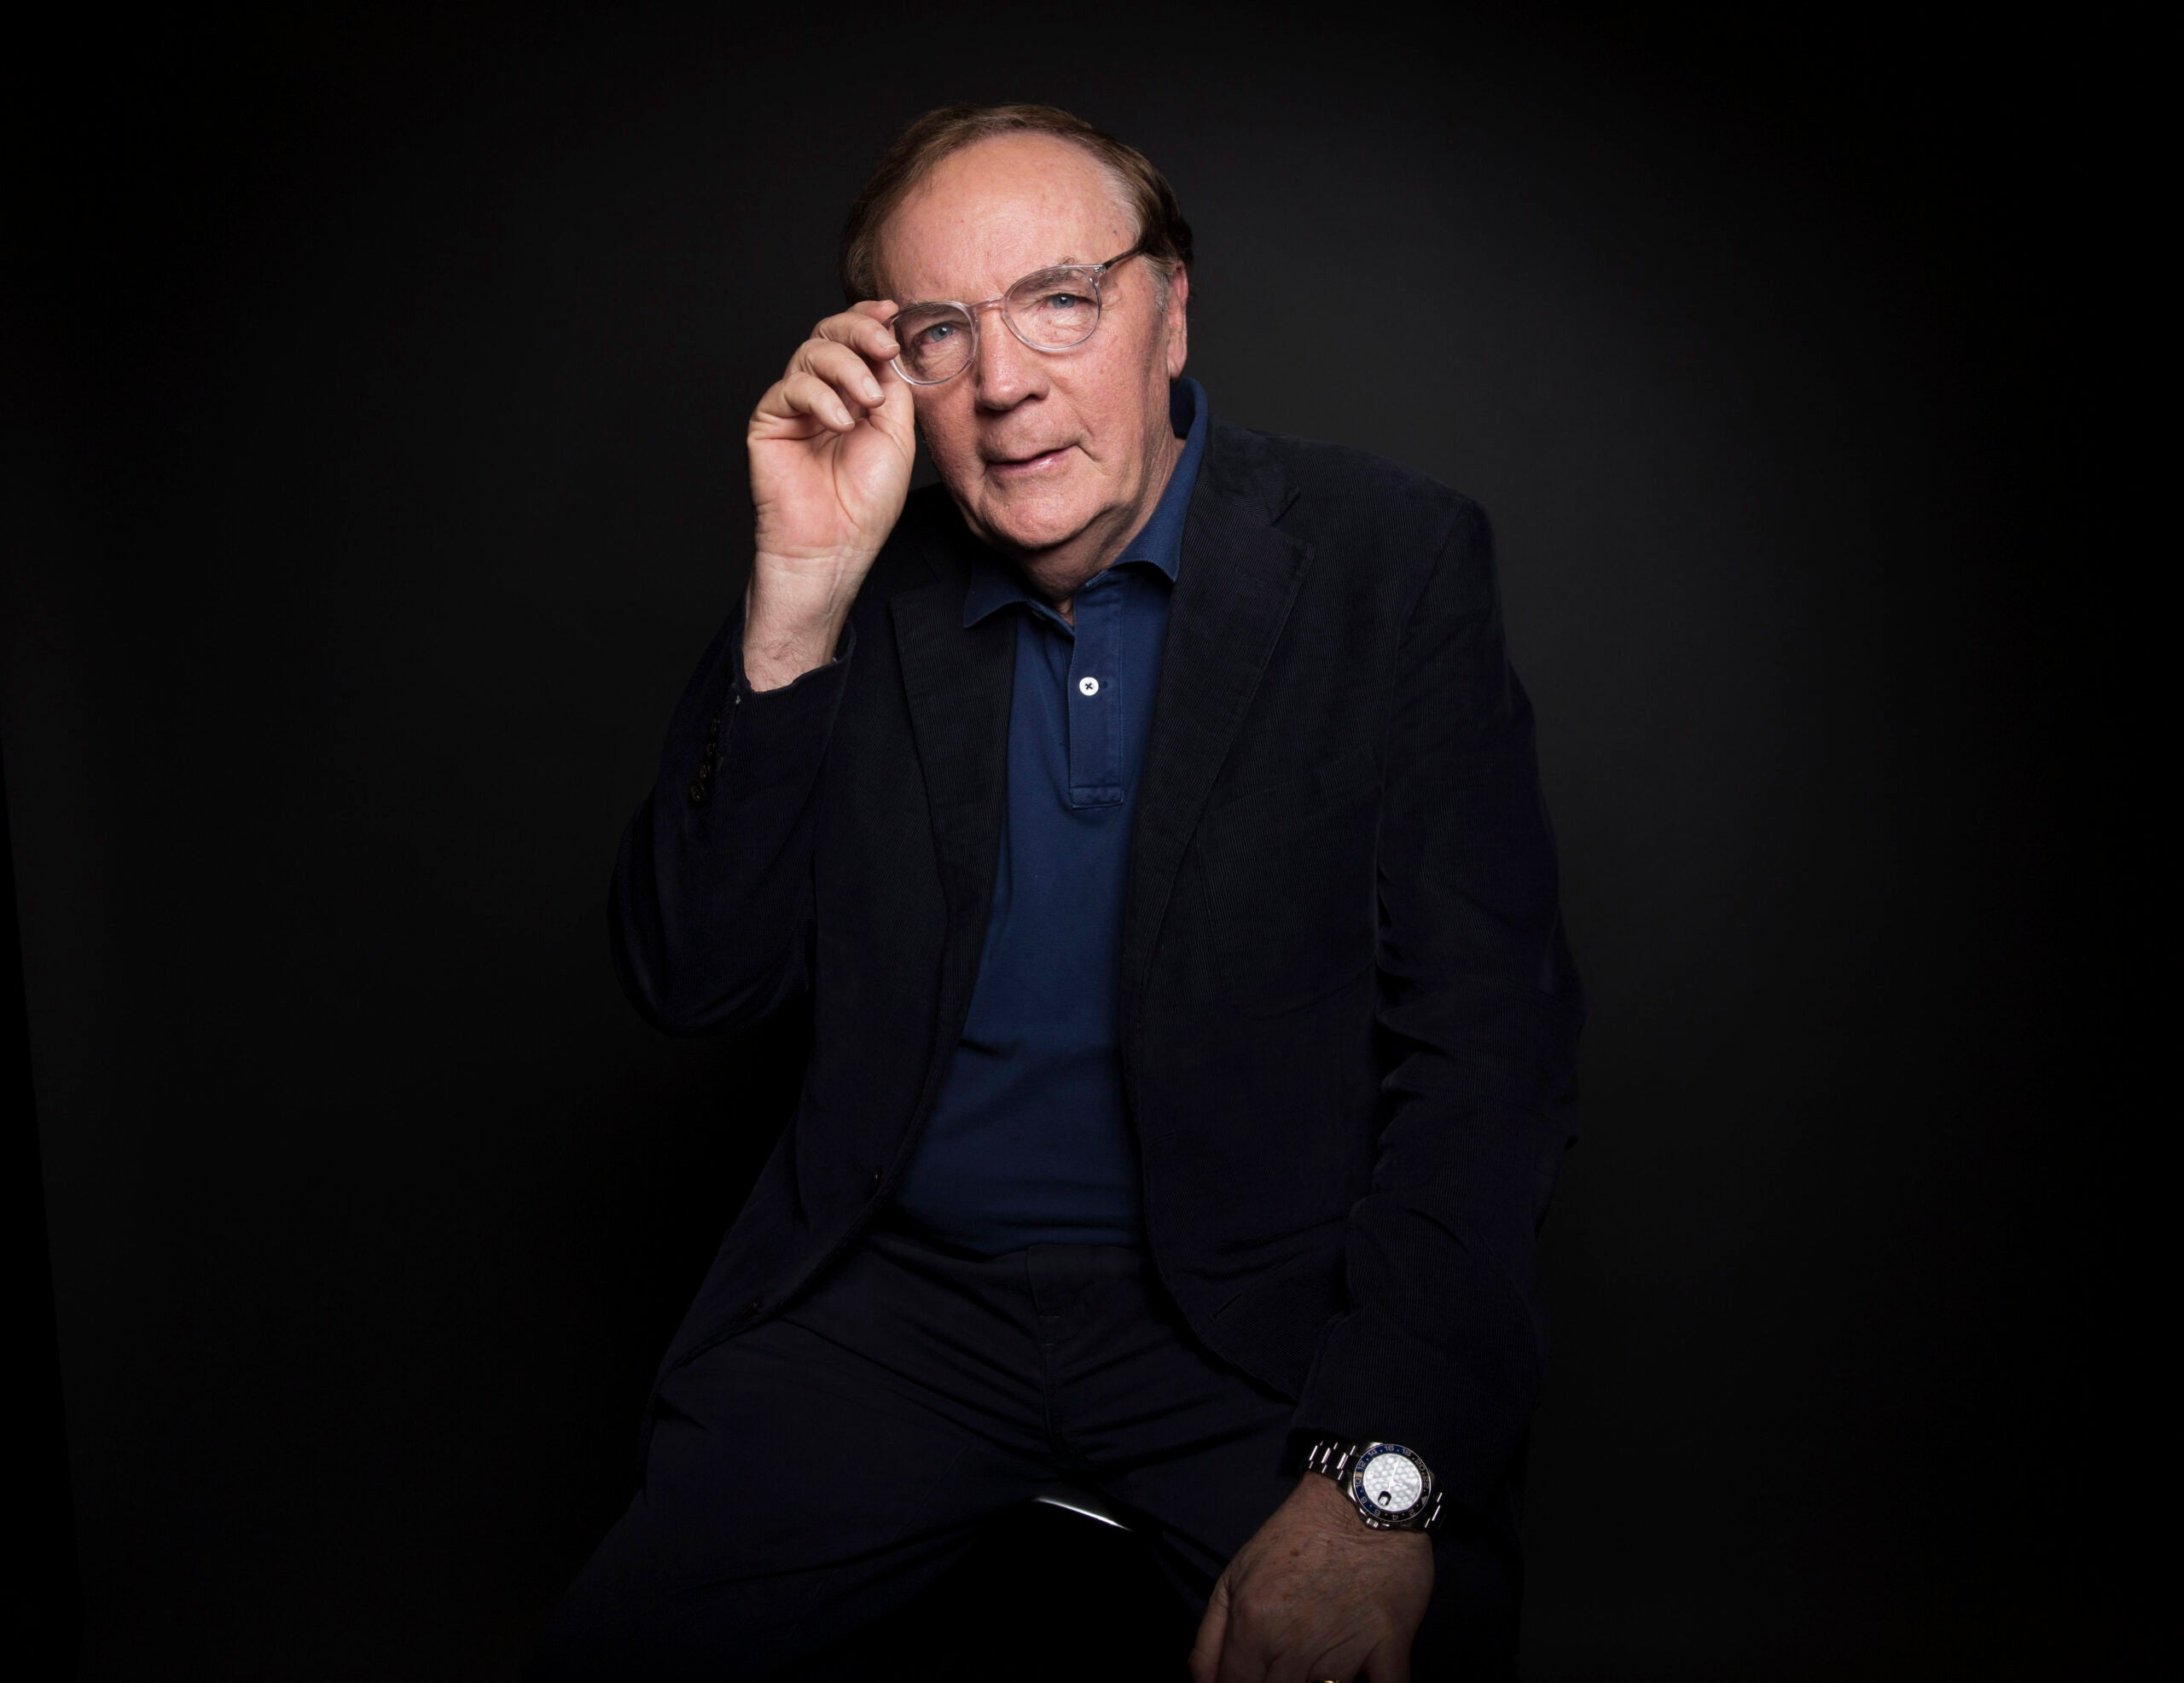 Author James Patterson poses for a portrait in New York.